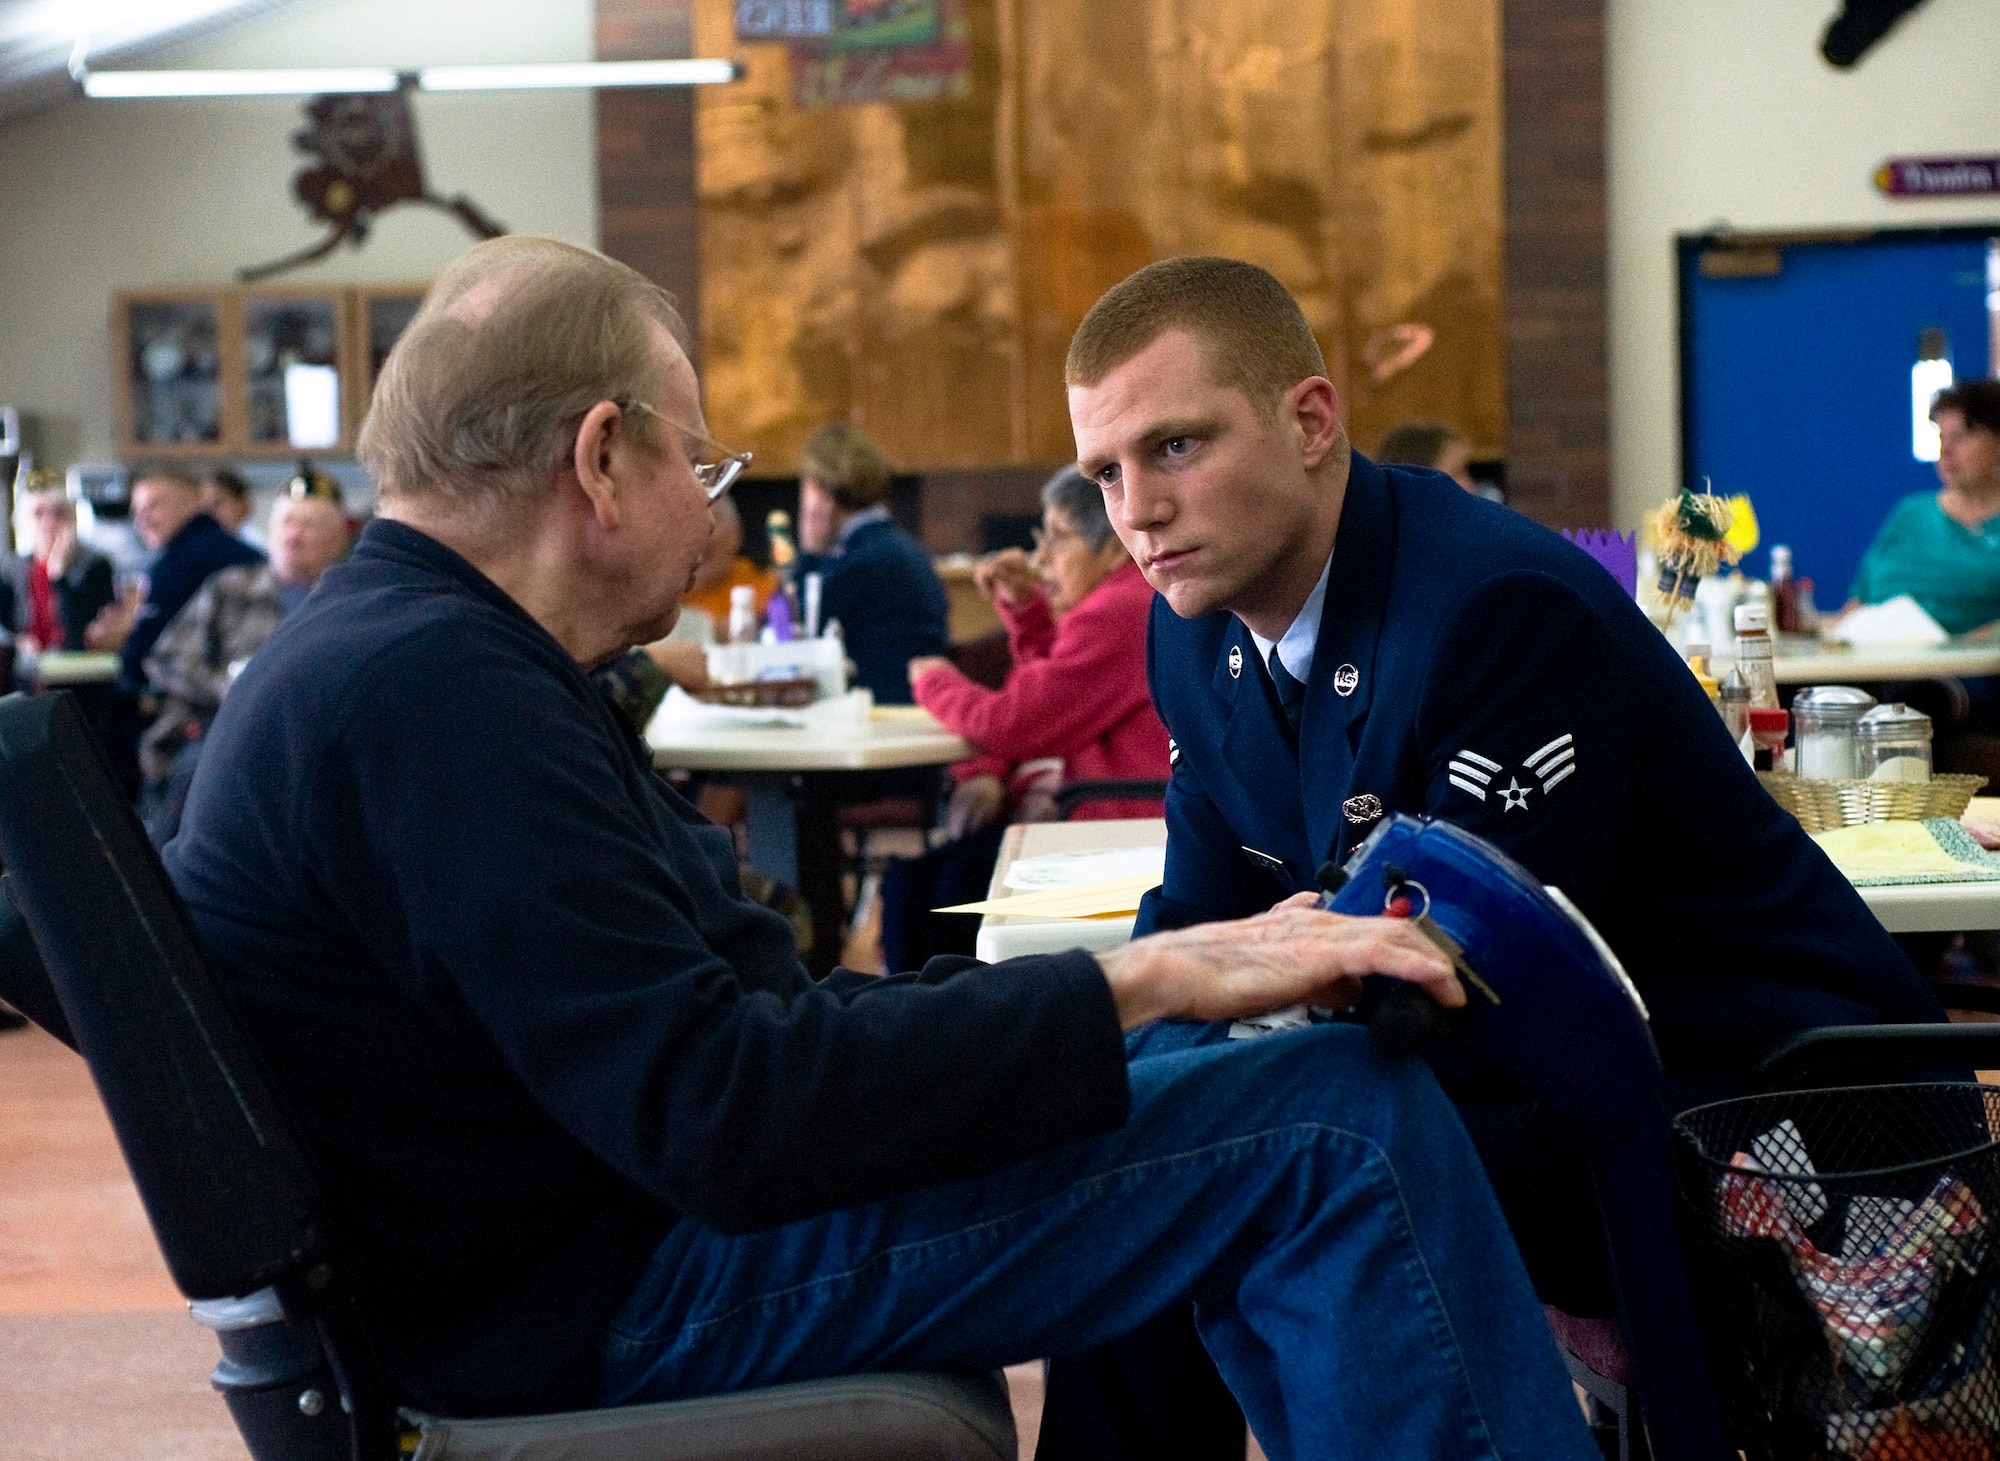 ANCHORAGE, Alaska -- Senior Airman David Curtis, 3rd Civil Engineer Squadron, listens to a veteran at Anchorage Pioneer Home Nov. 7. Arctic Warriors spent some time with veterans to socialize and eat ice cream. (U.S. Air Force photo/Senior Airman Jonathan Steffen)